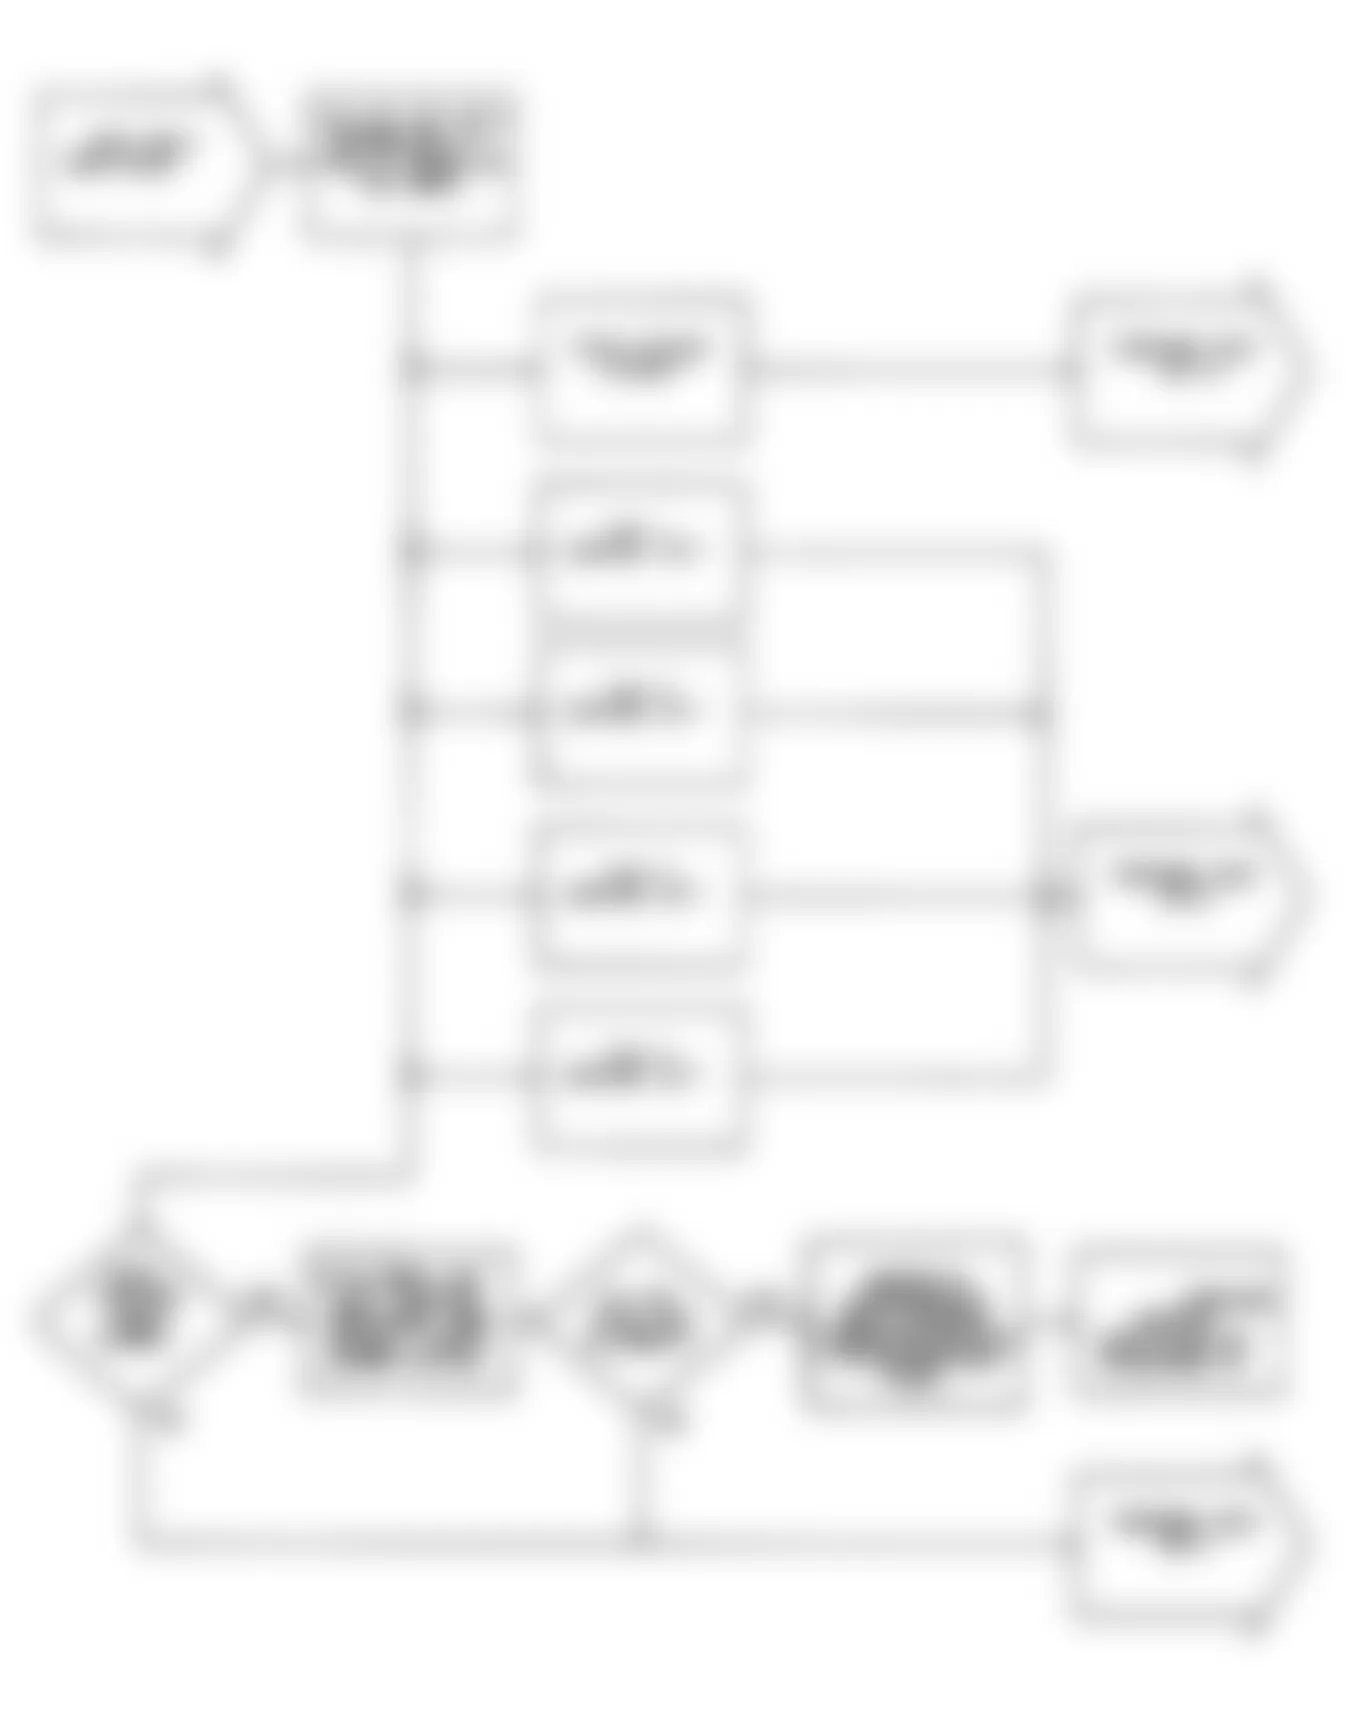 Chrysler LeBaron 1990 - Component Locations -  NS-2: Flow Chart (2 of 2)